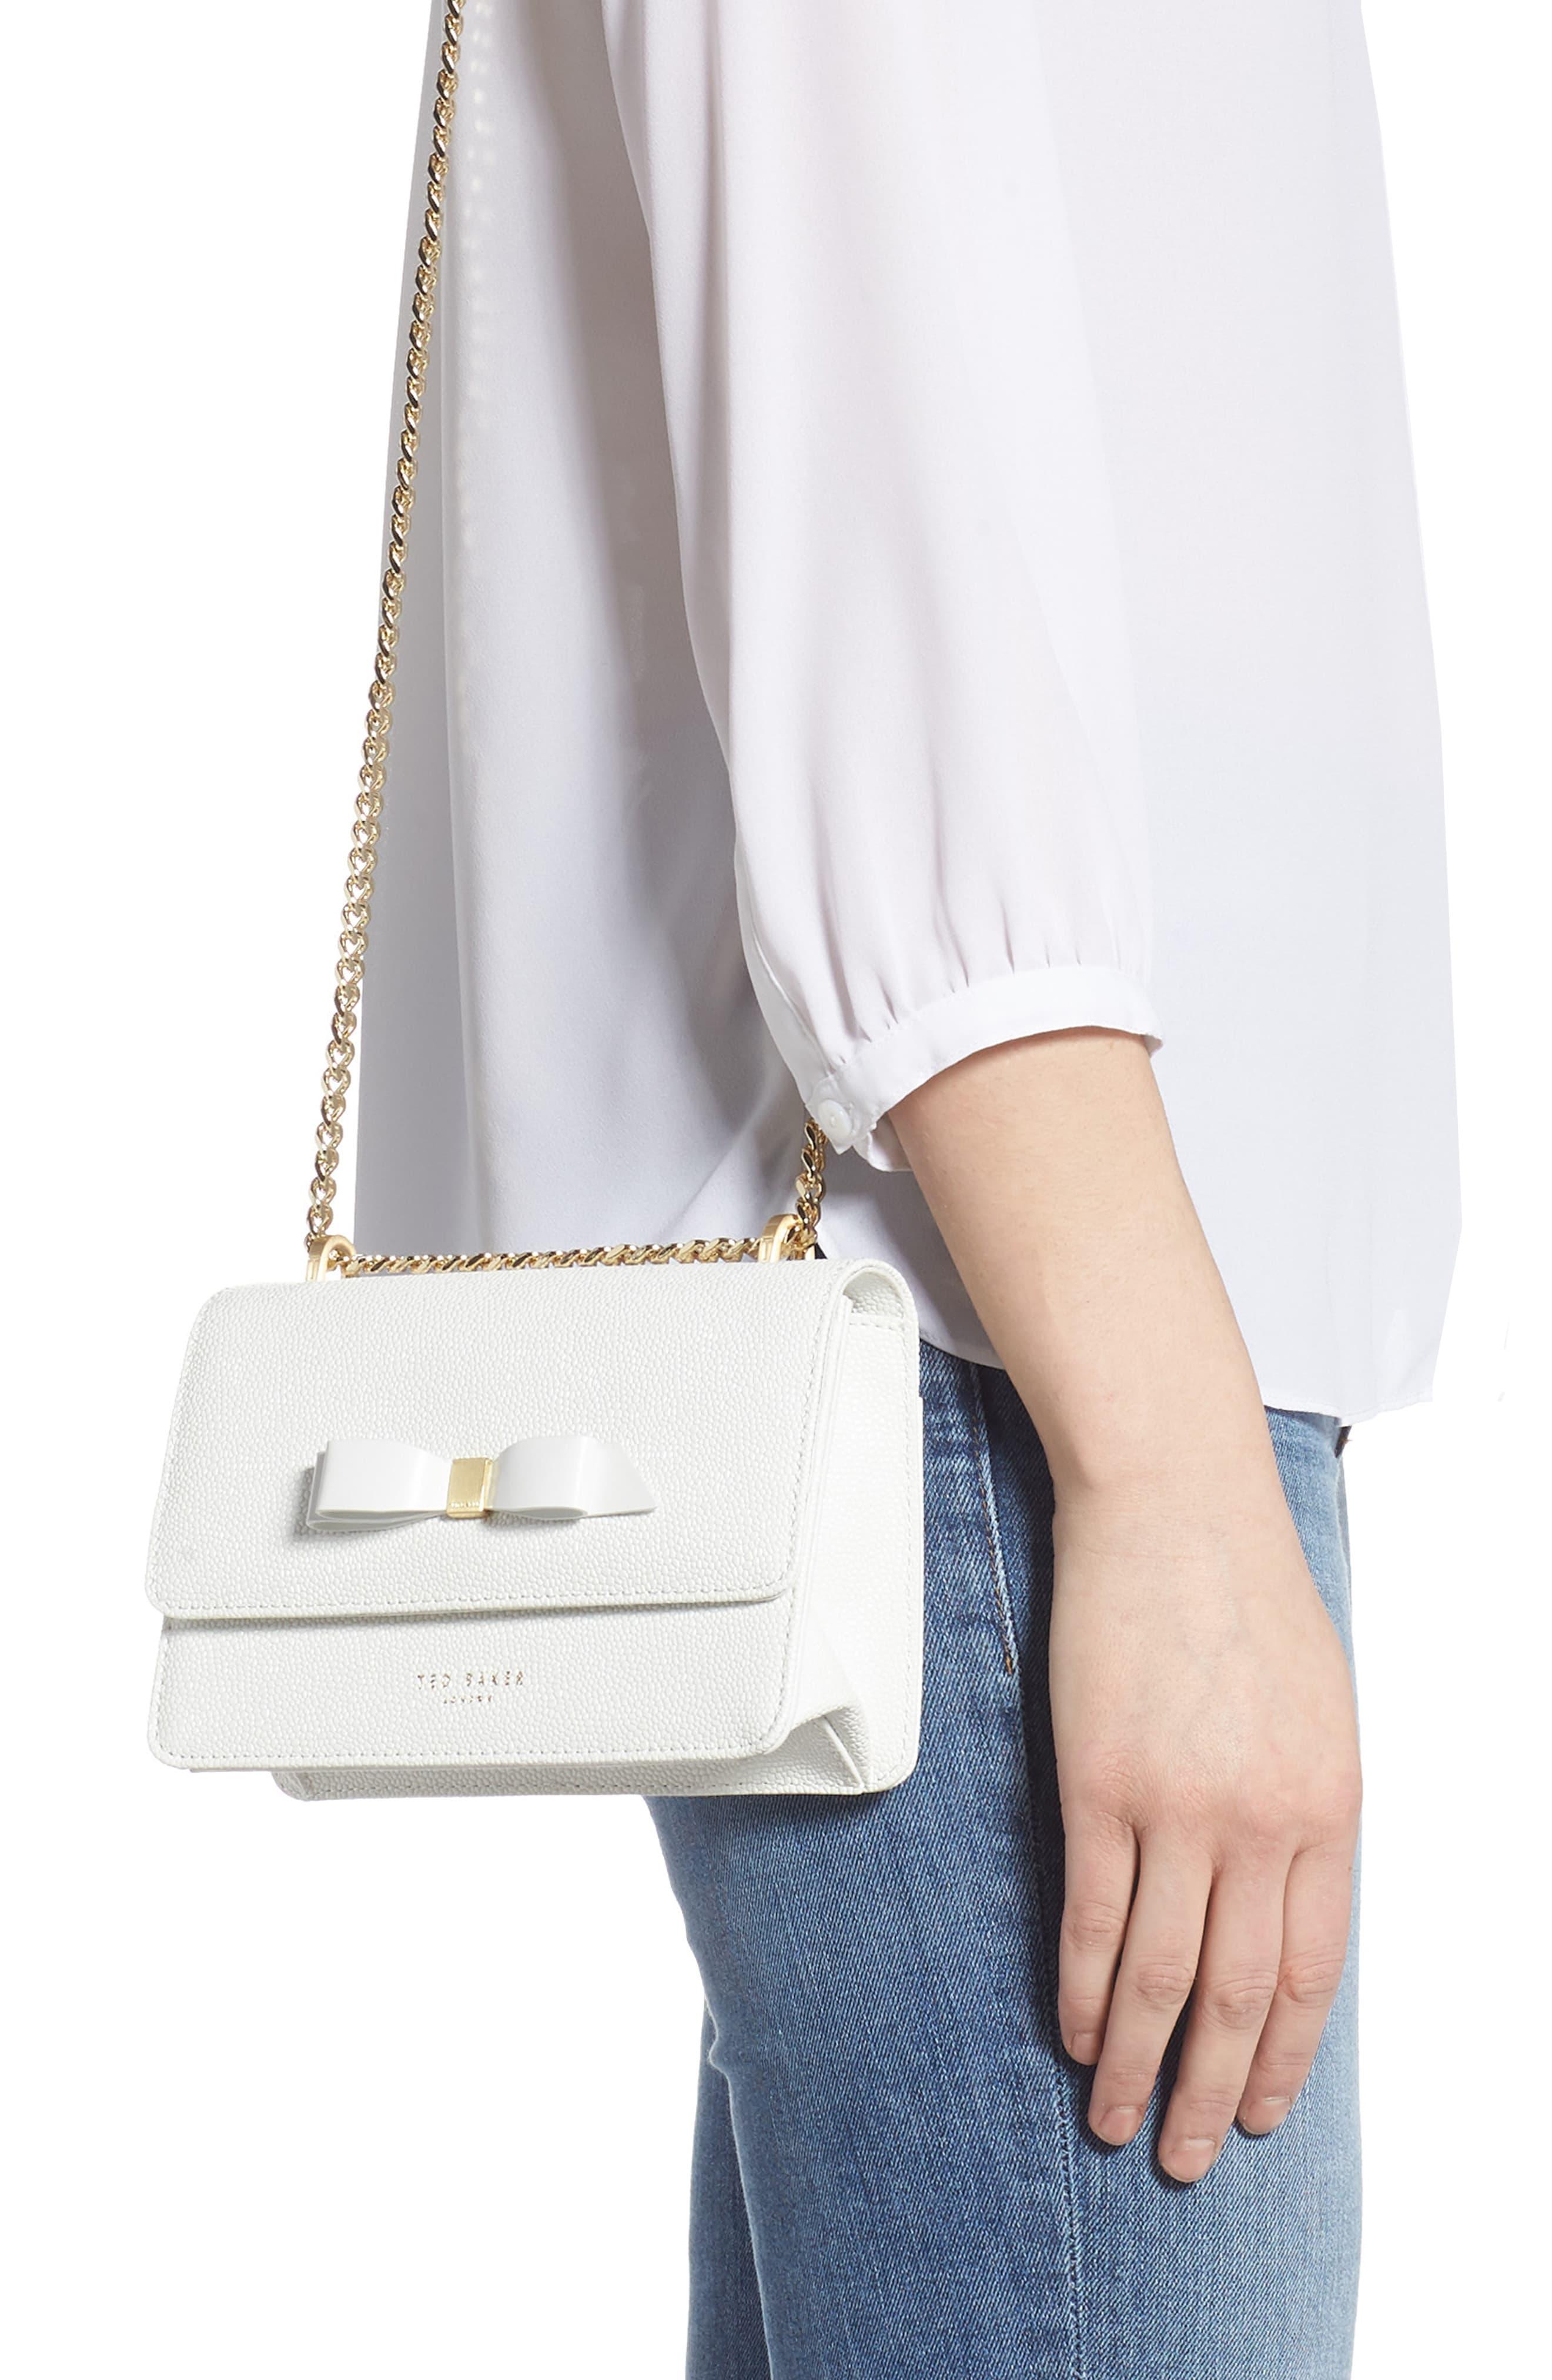 Ted Baker Jayllaa Bow Leather Crossbody Bag in White - Lyst